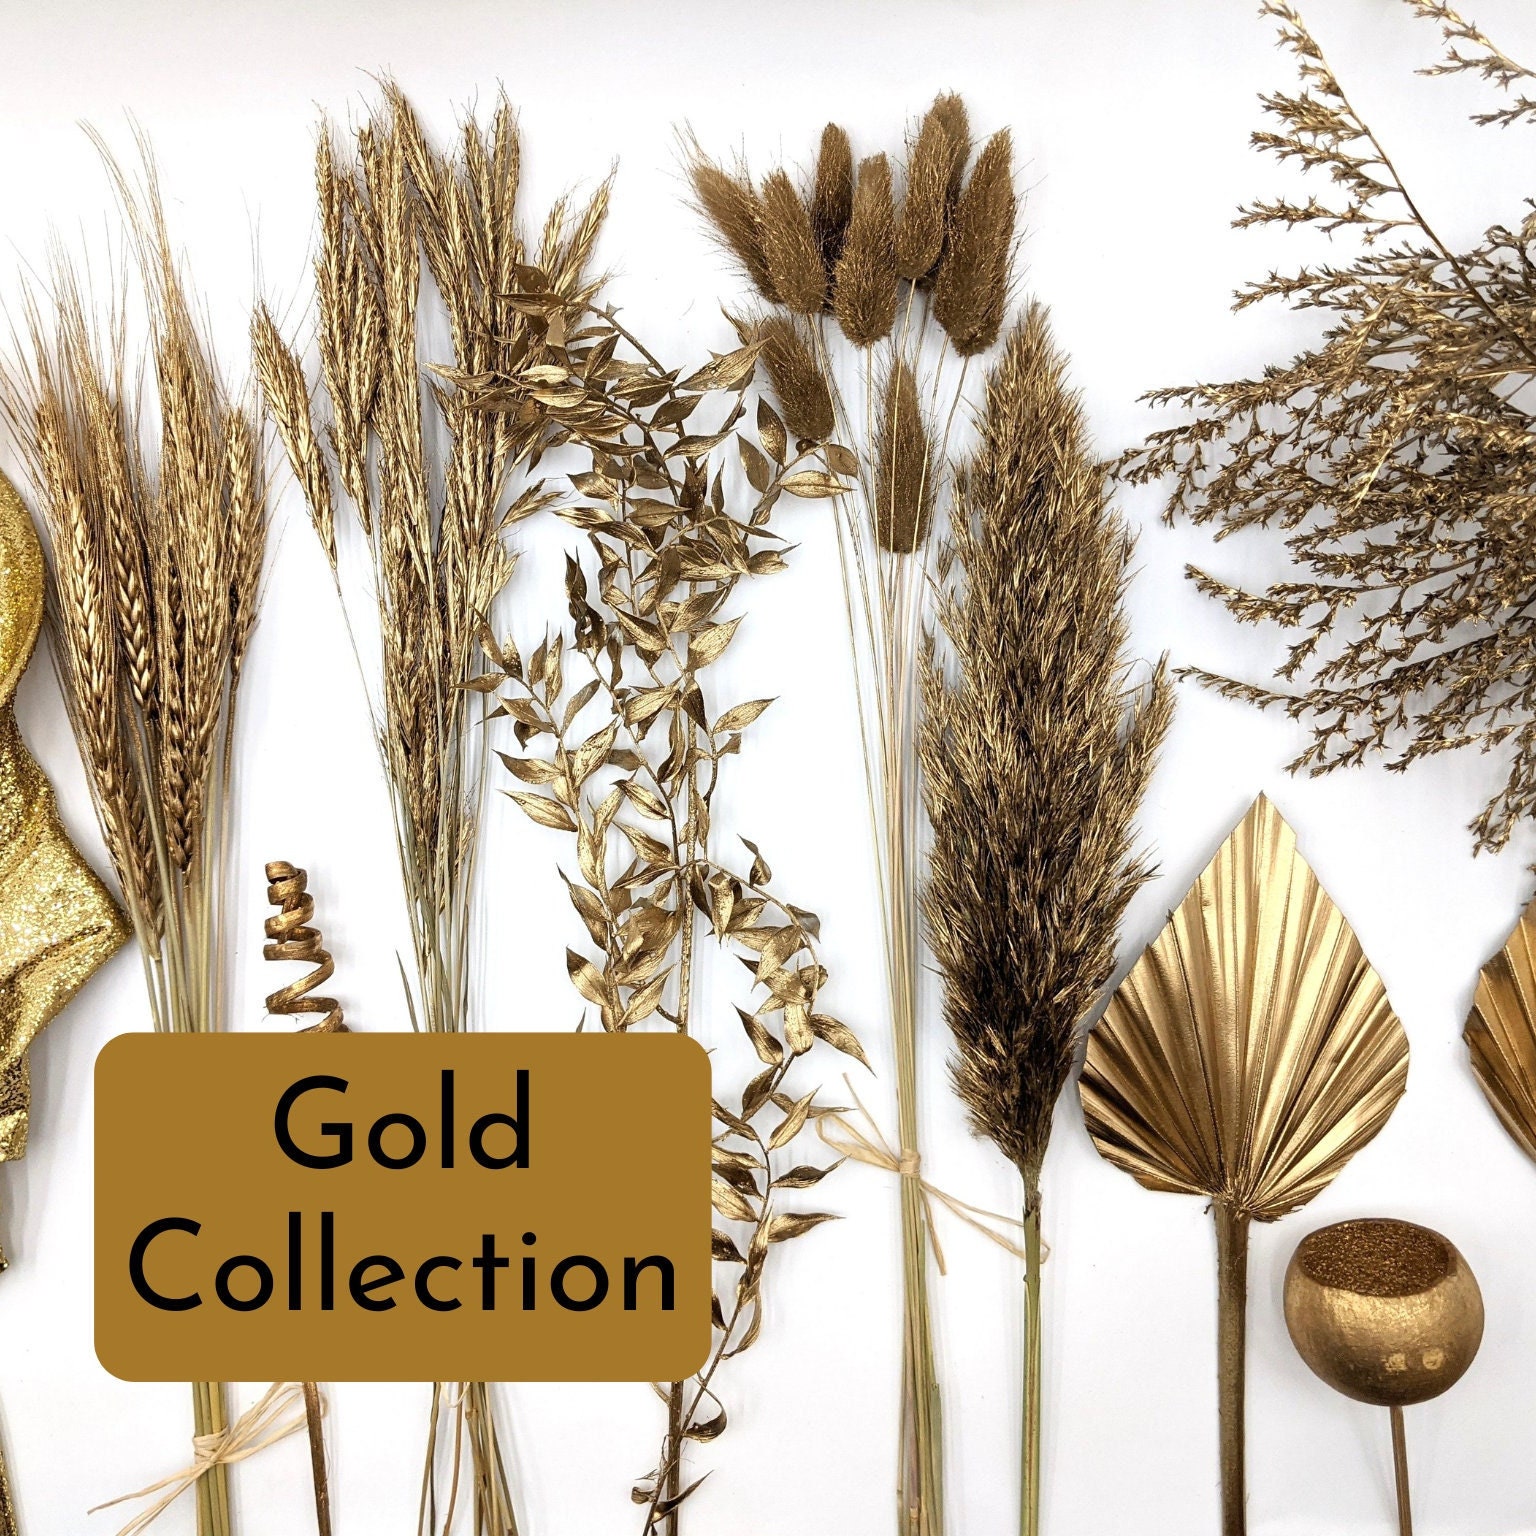  Gold Yellow Pampas Grass, Farmhouse Flowers Decor, Gold Flowers  Tall,8Pcs 31.5 Rustic Dried Pampas Grass,Natural Dried Pompas Floral  ,Gorgeous Bronzy Gold Decor for Living Room,with Natural Fragrance : Home &  Kitchen